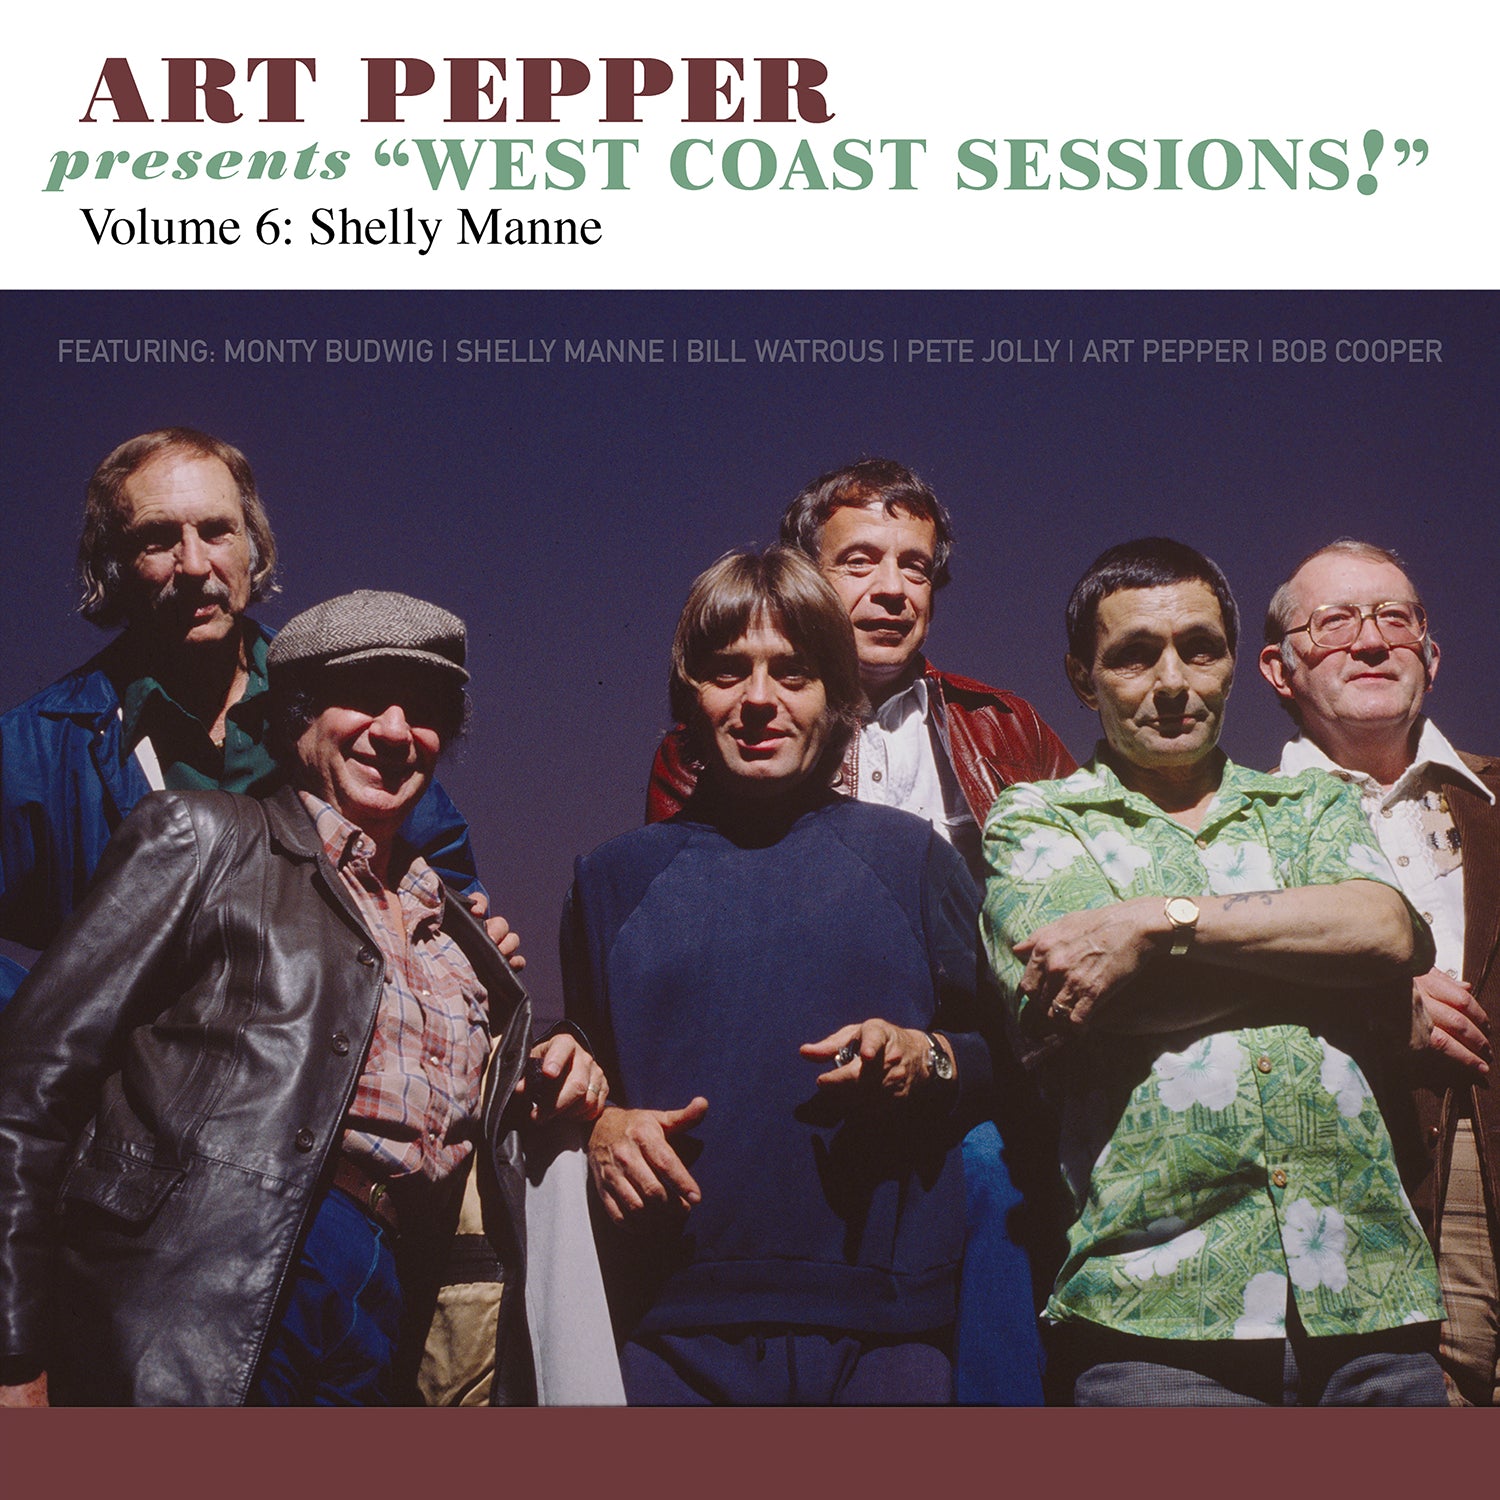 Art Pepper Presents “West Coast Sessions!” Volume 6: Shelly Manne